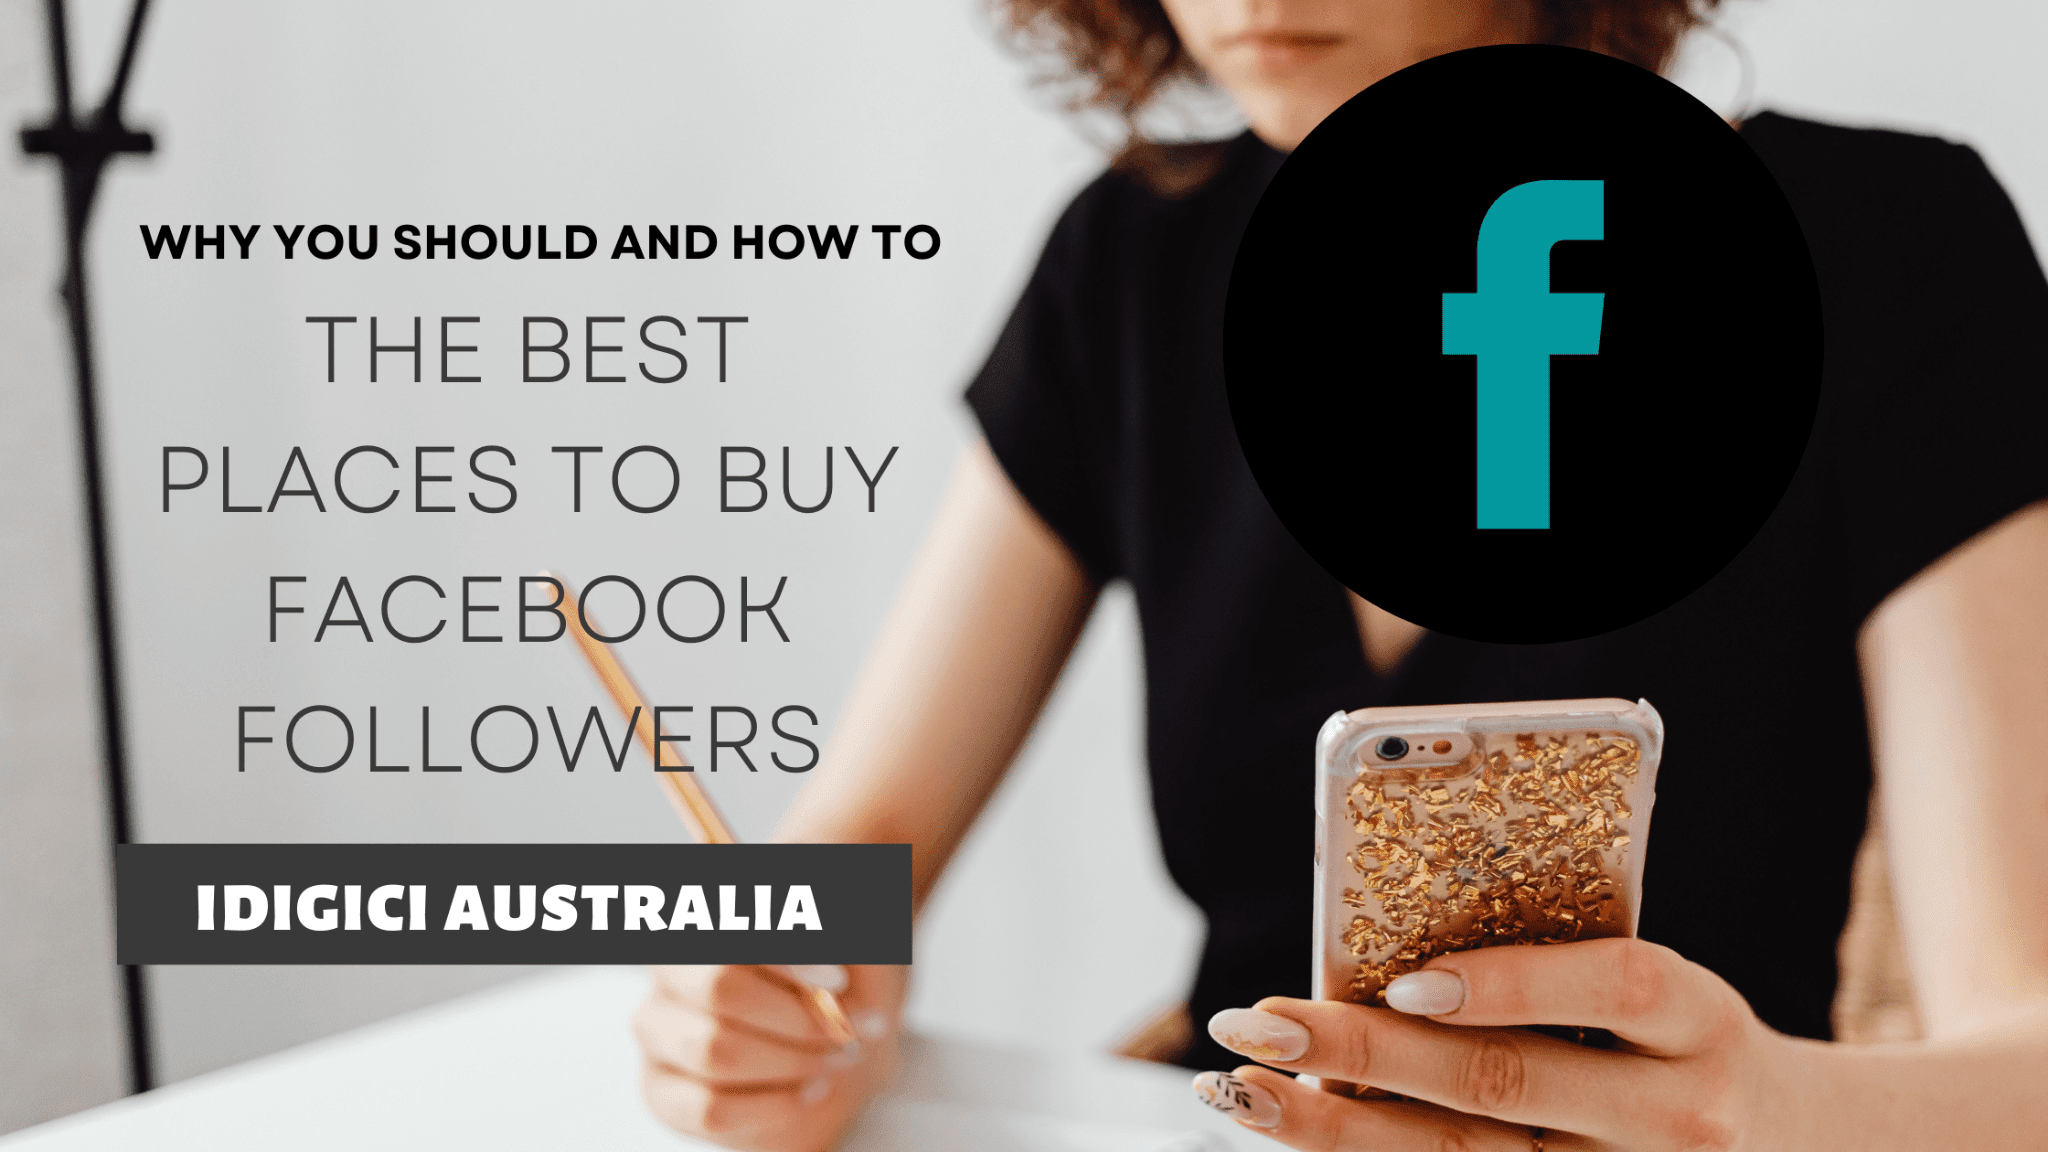 The Best Places to Buy Facebook Followers